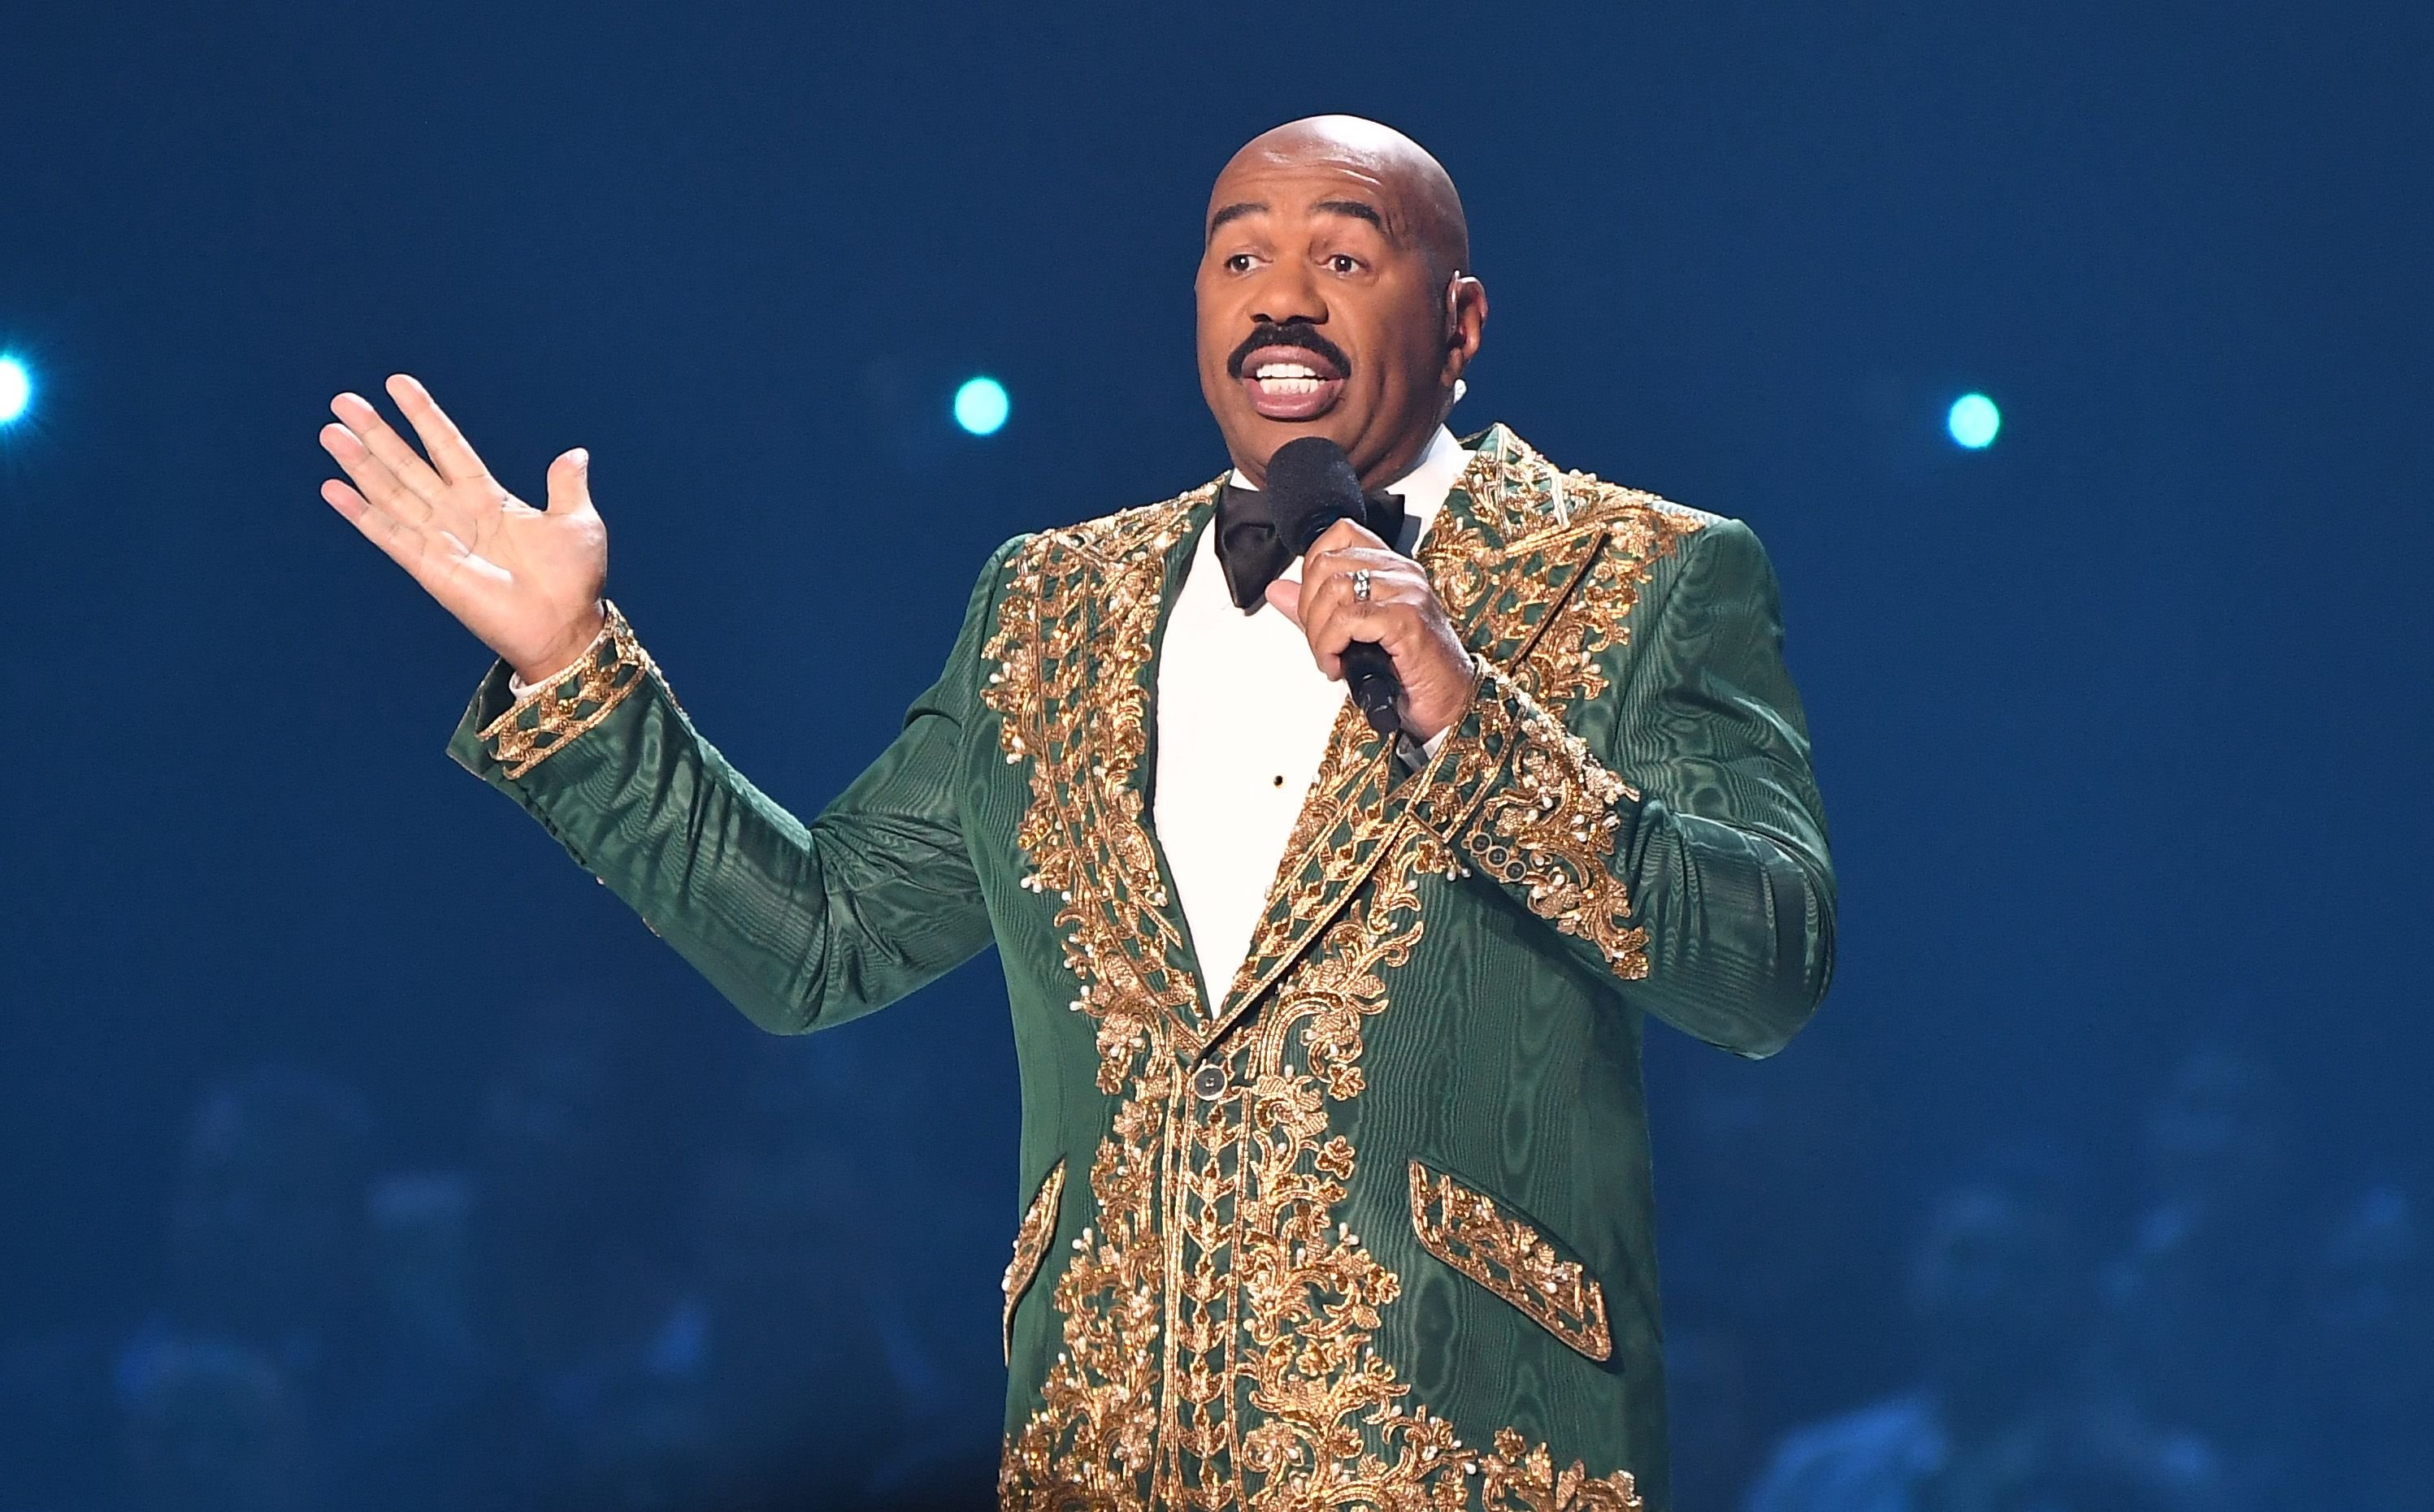 Steve Harvey speaks during the Miss Universe pageant at Tyler Perry Studios on December 8, 2019. | Photo: Getty Images